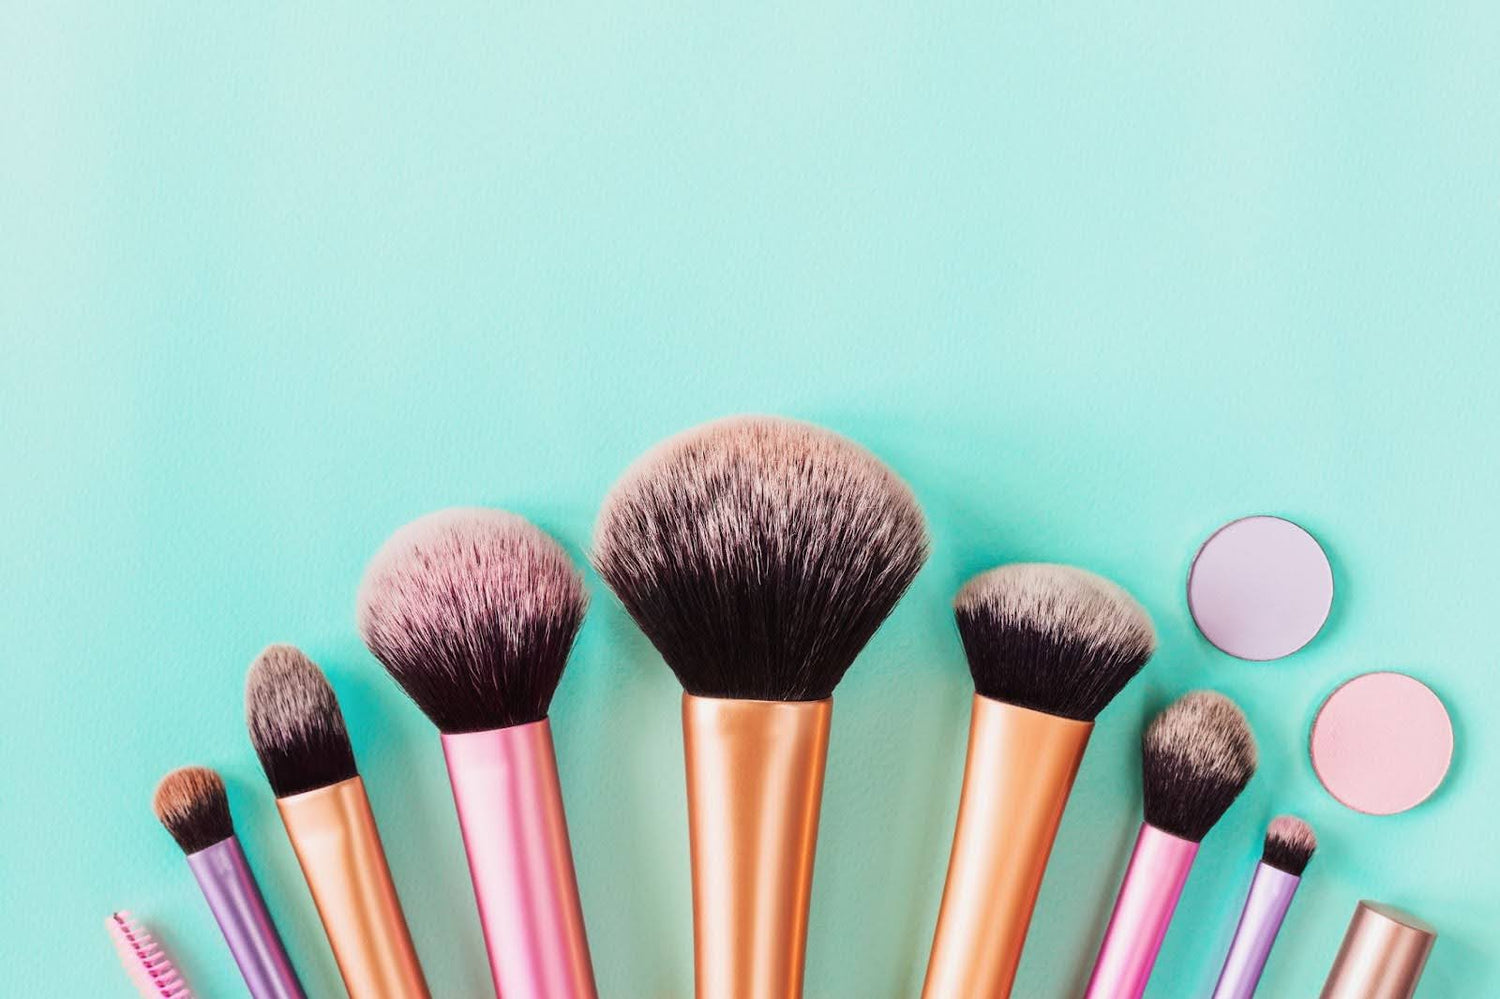 Makeup Brushes in a line on aqua colored background. 